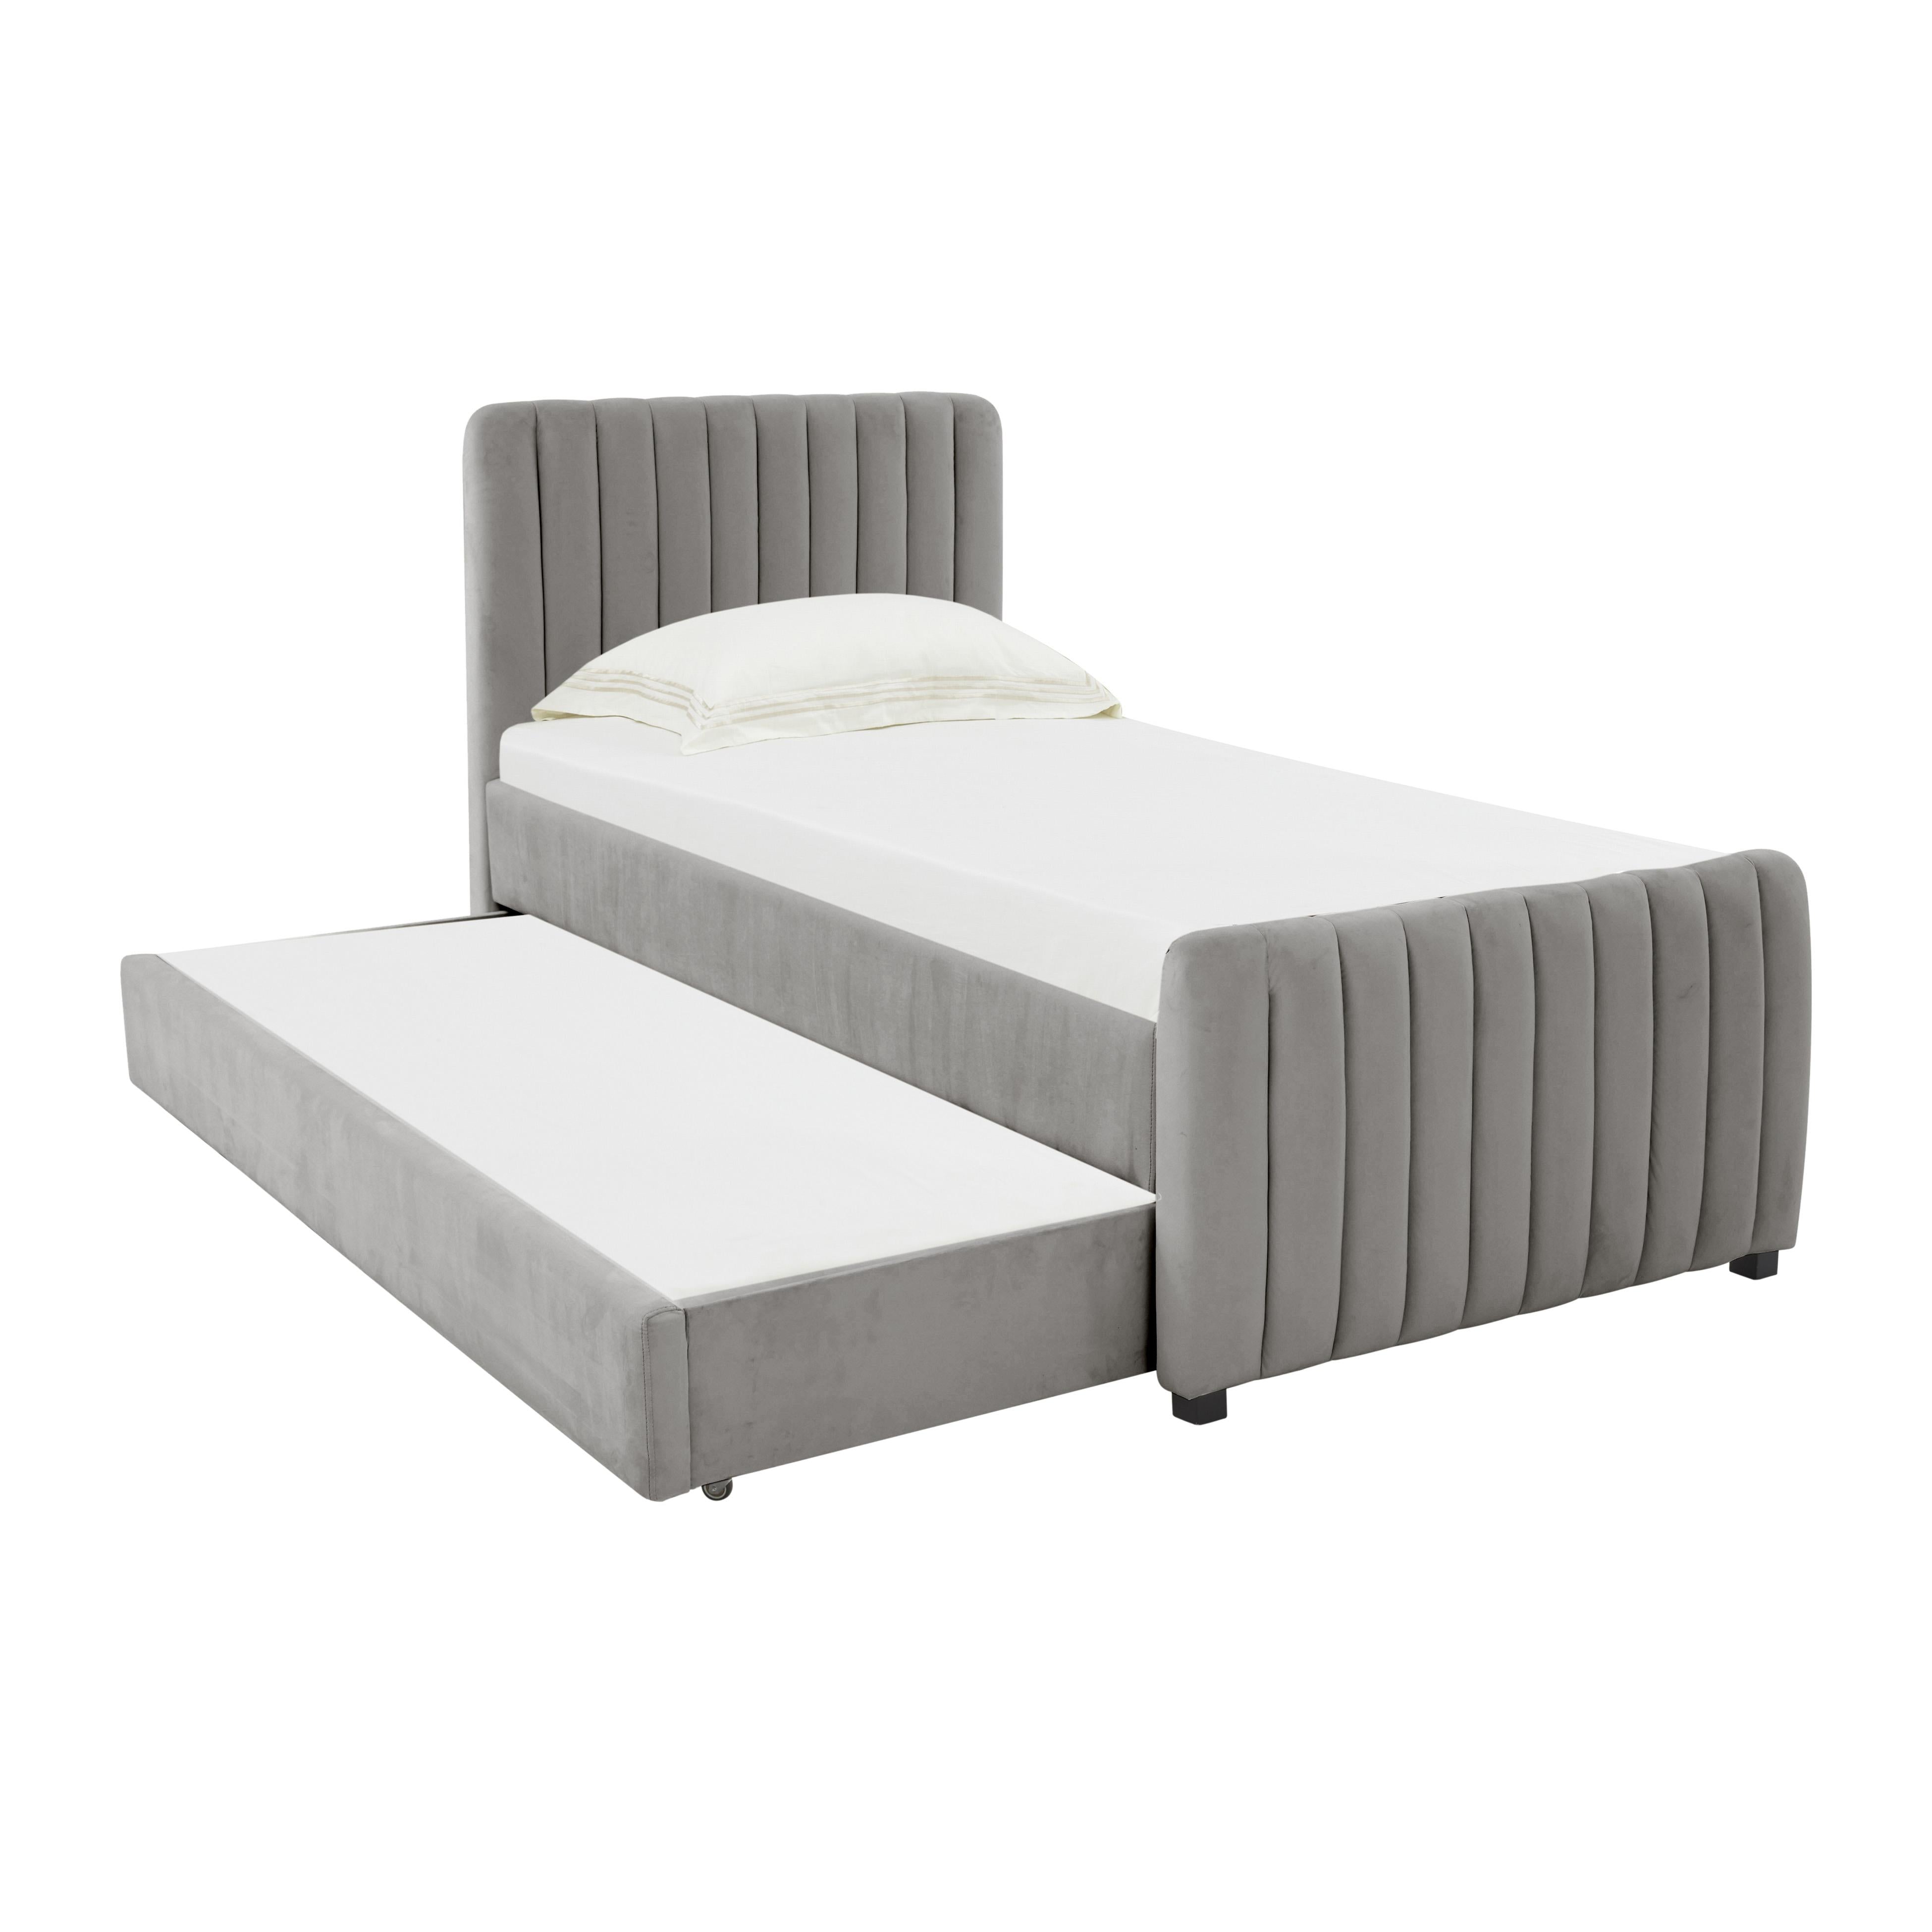 Tov Furniture Beds - Angela Grey Trundle in Twin